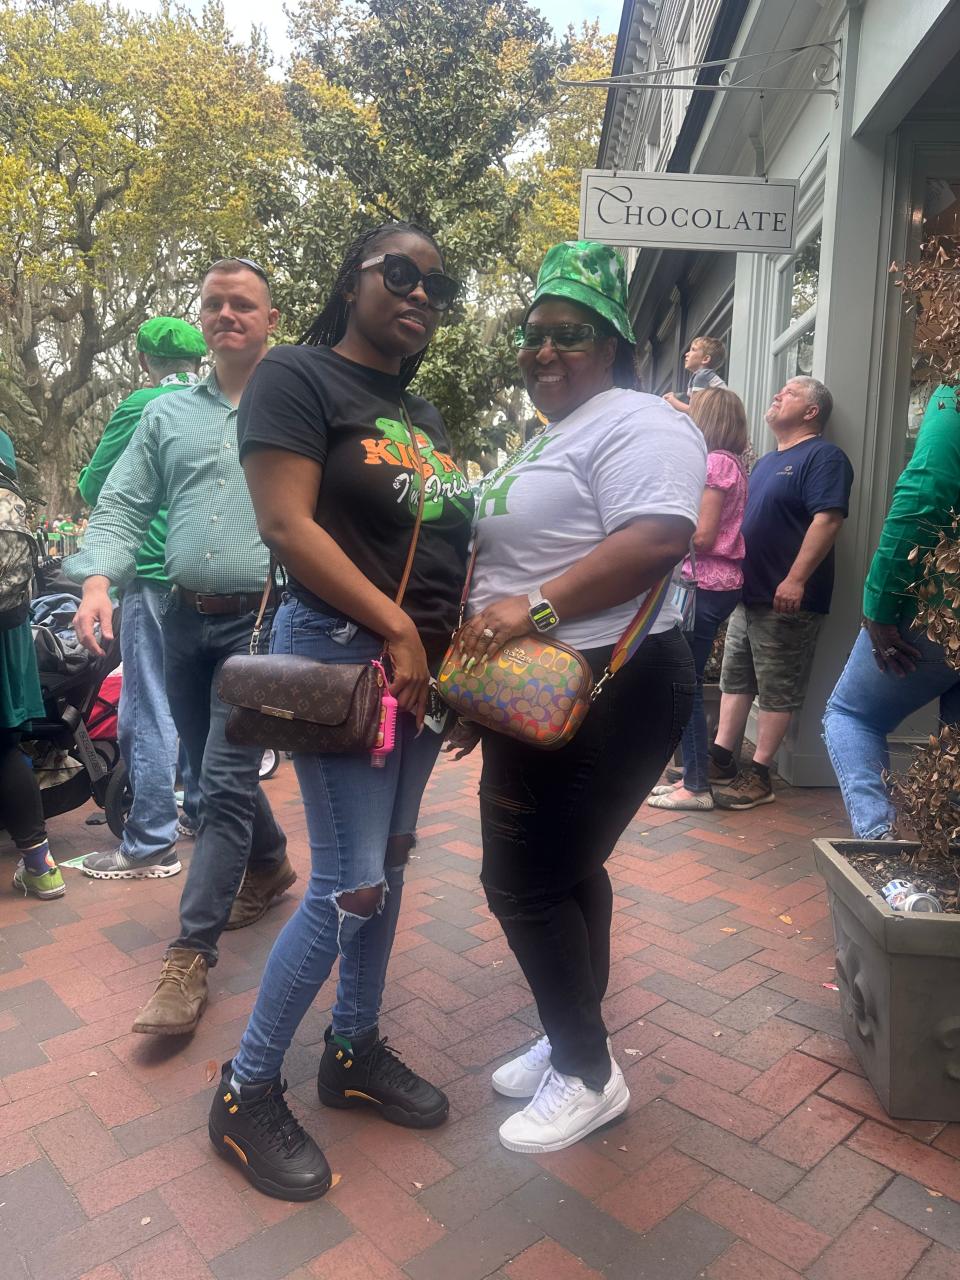 Juanita Baskin (left) and Kesha Smart (right) are visiting from Jacksonville, Florida. The cousins have plans to party on River Street this evening.